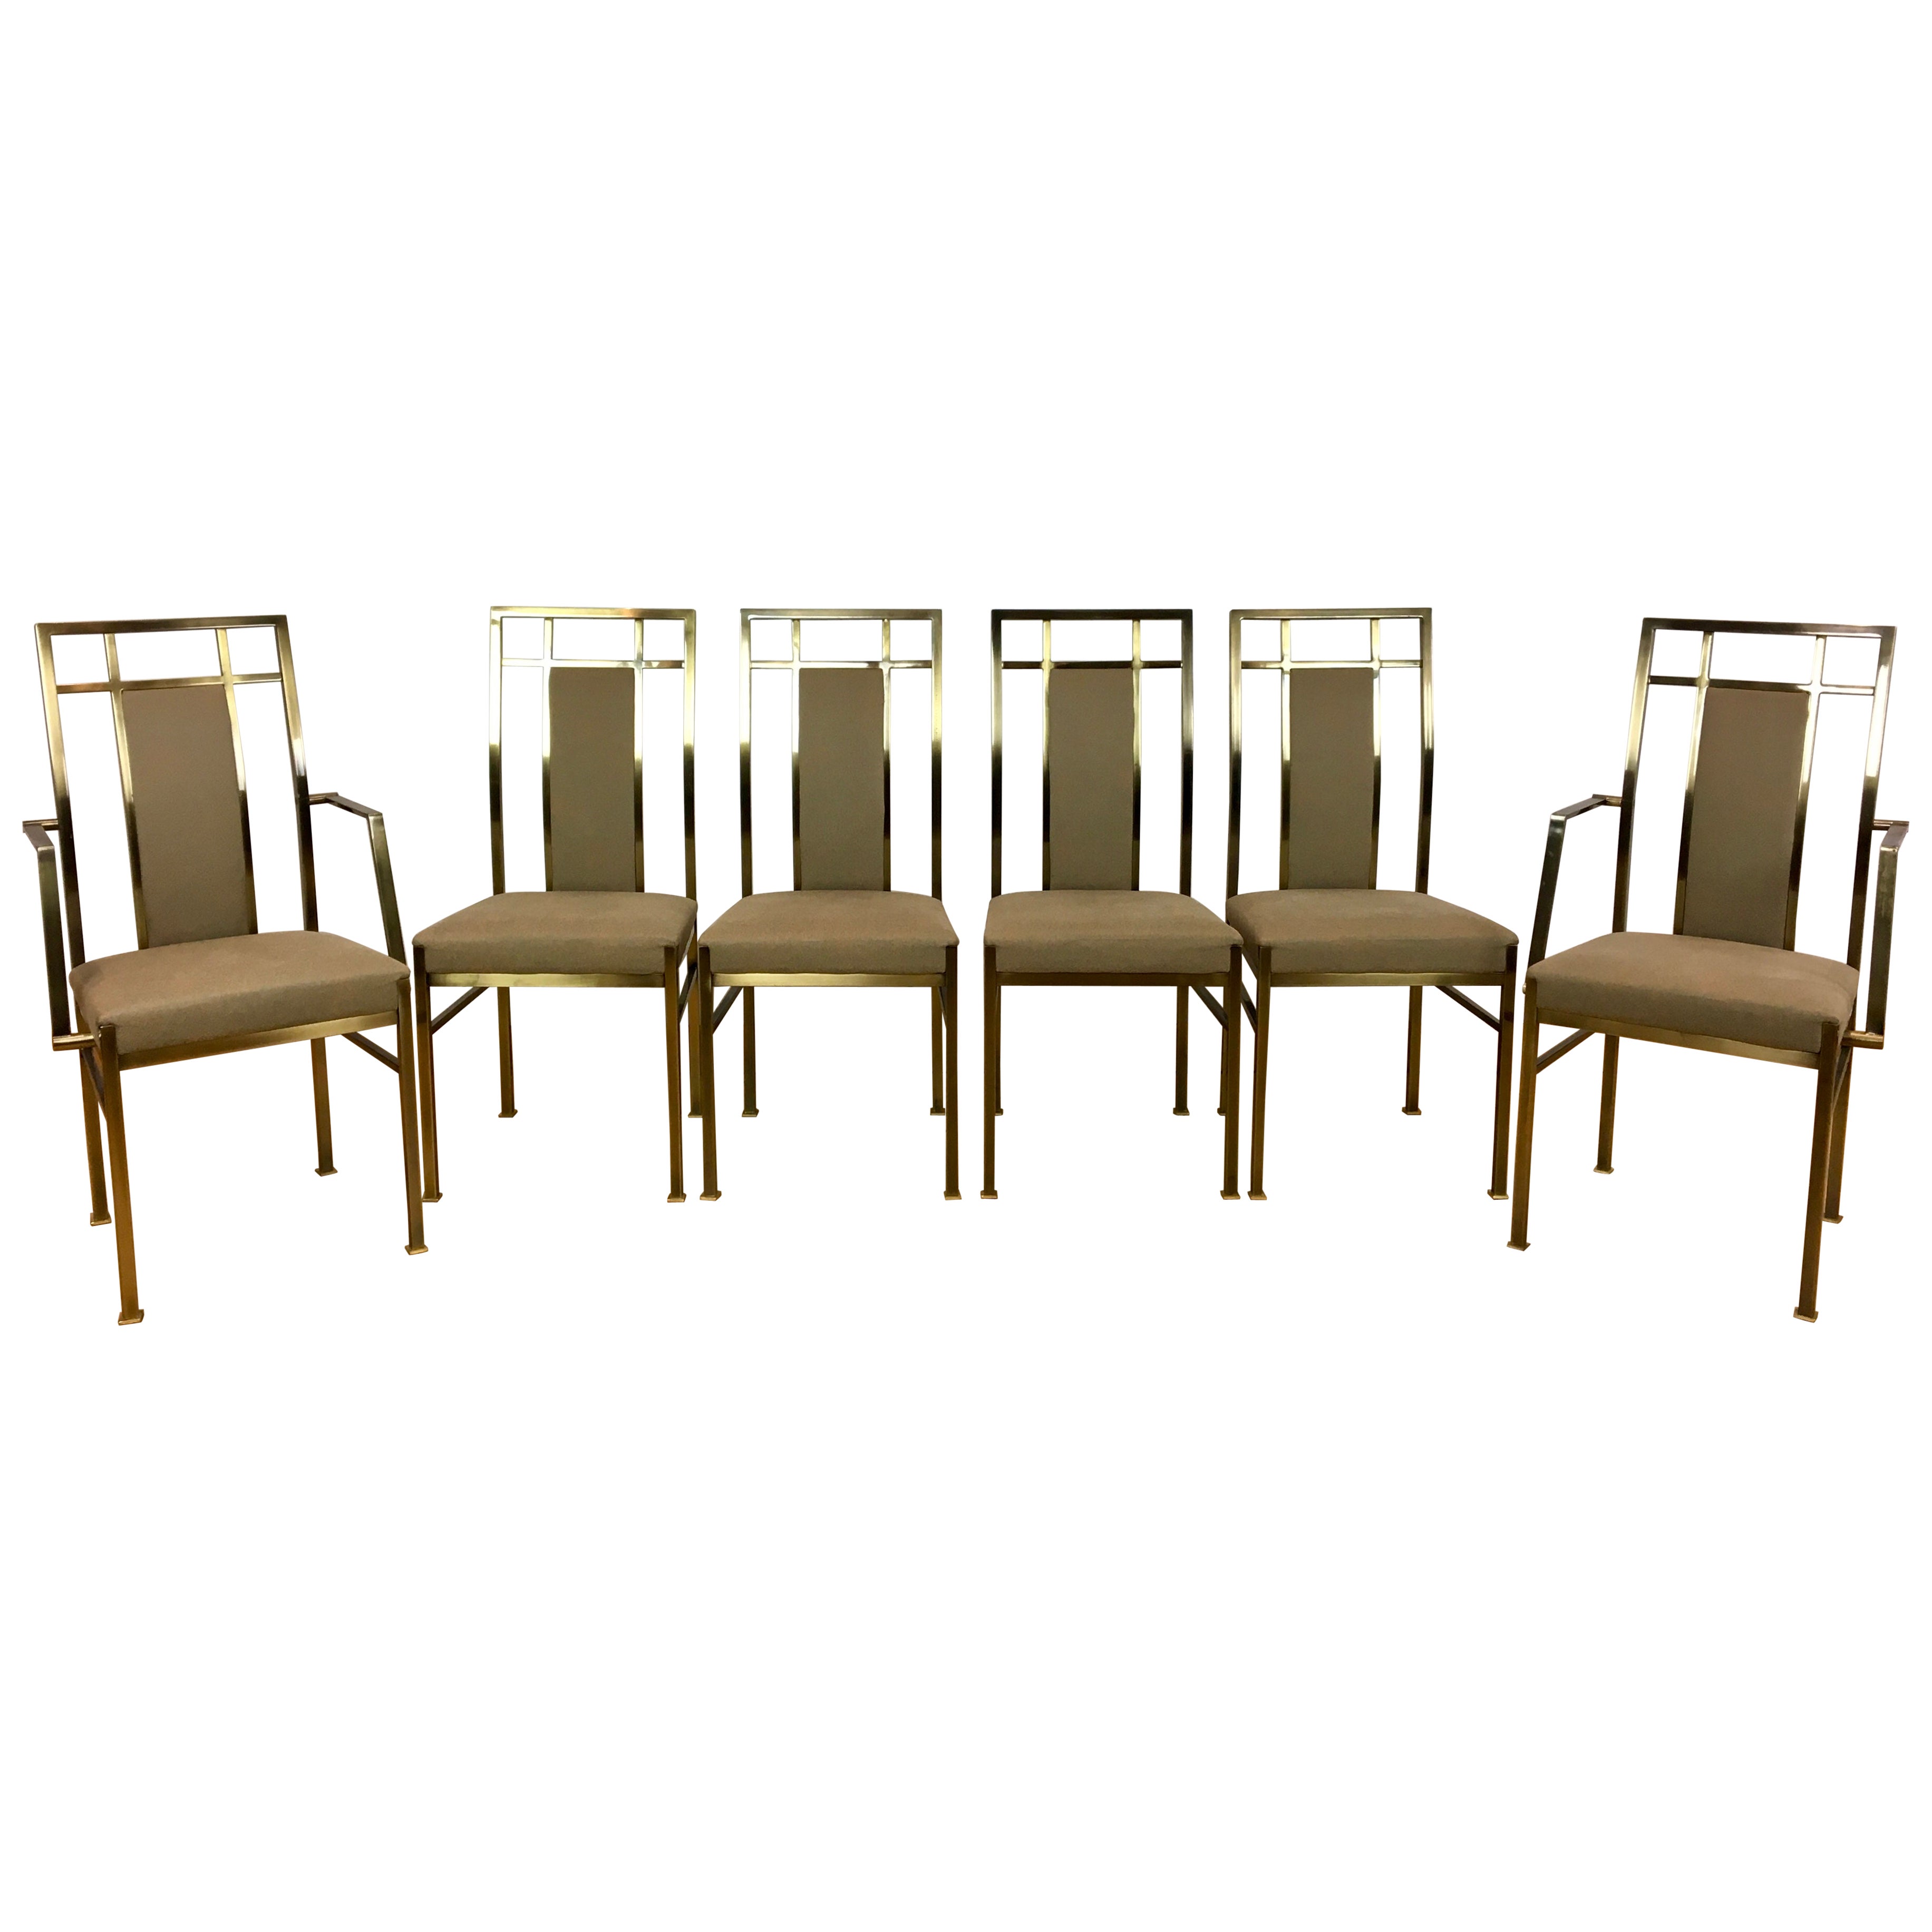 6 Belgo Chrome Dining Room Chairs,  Gold - plated 